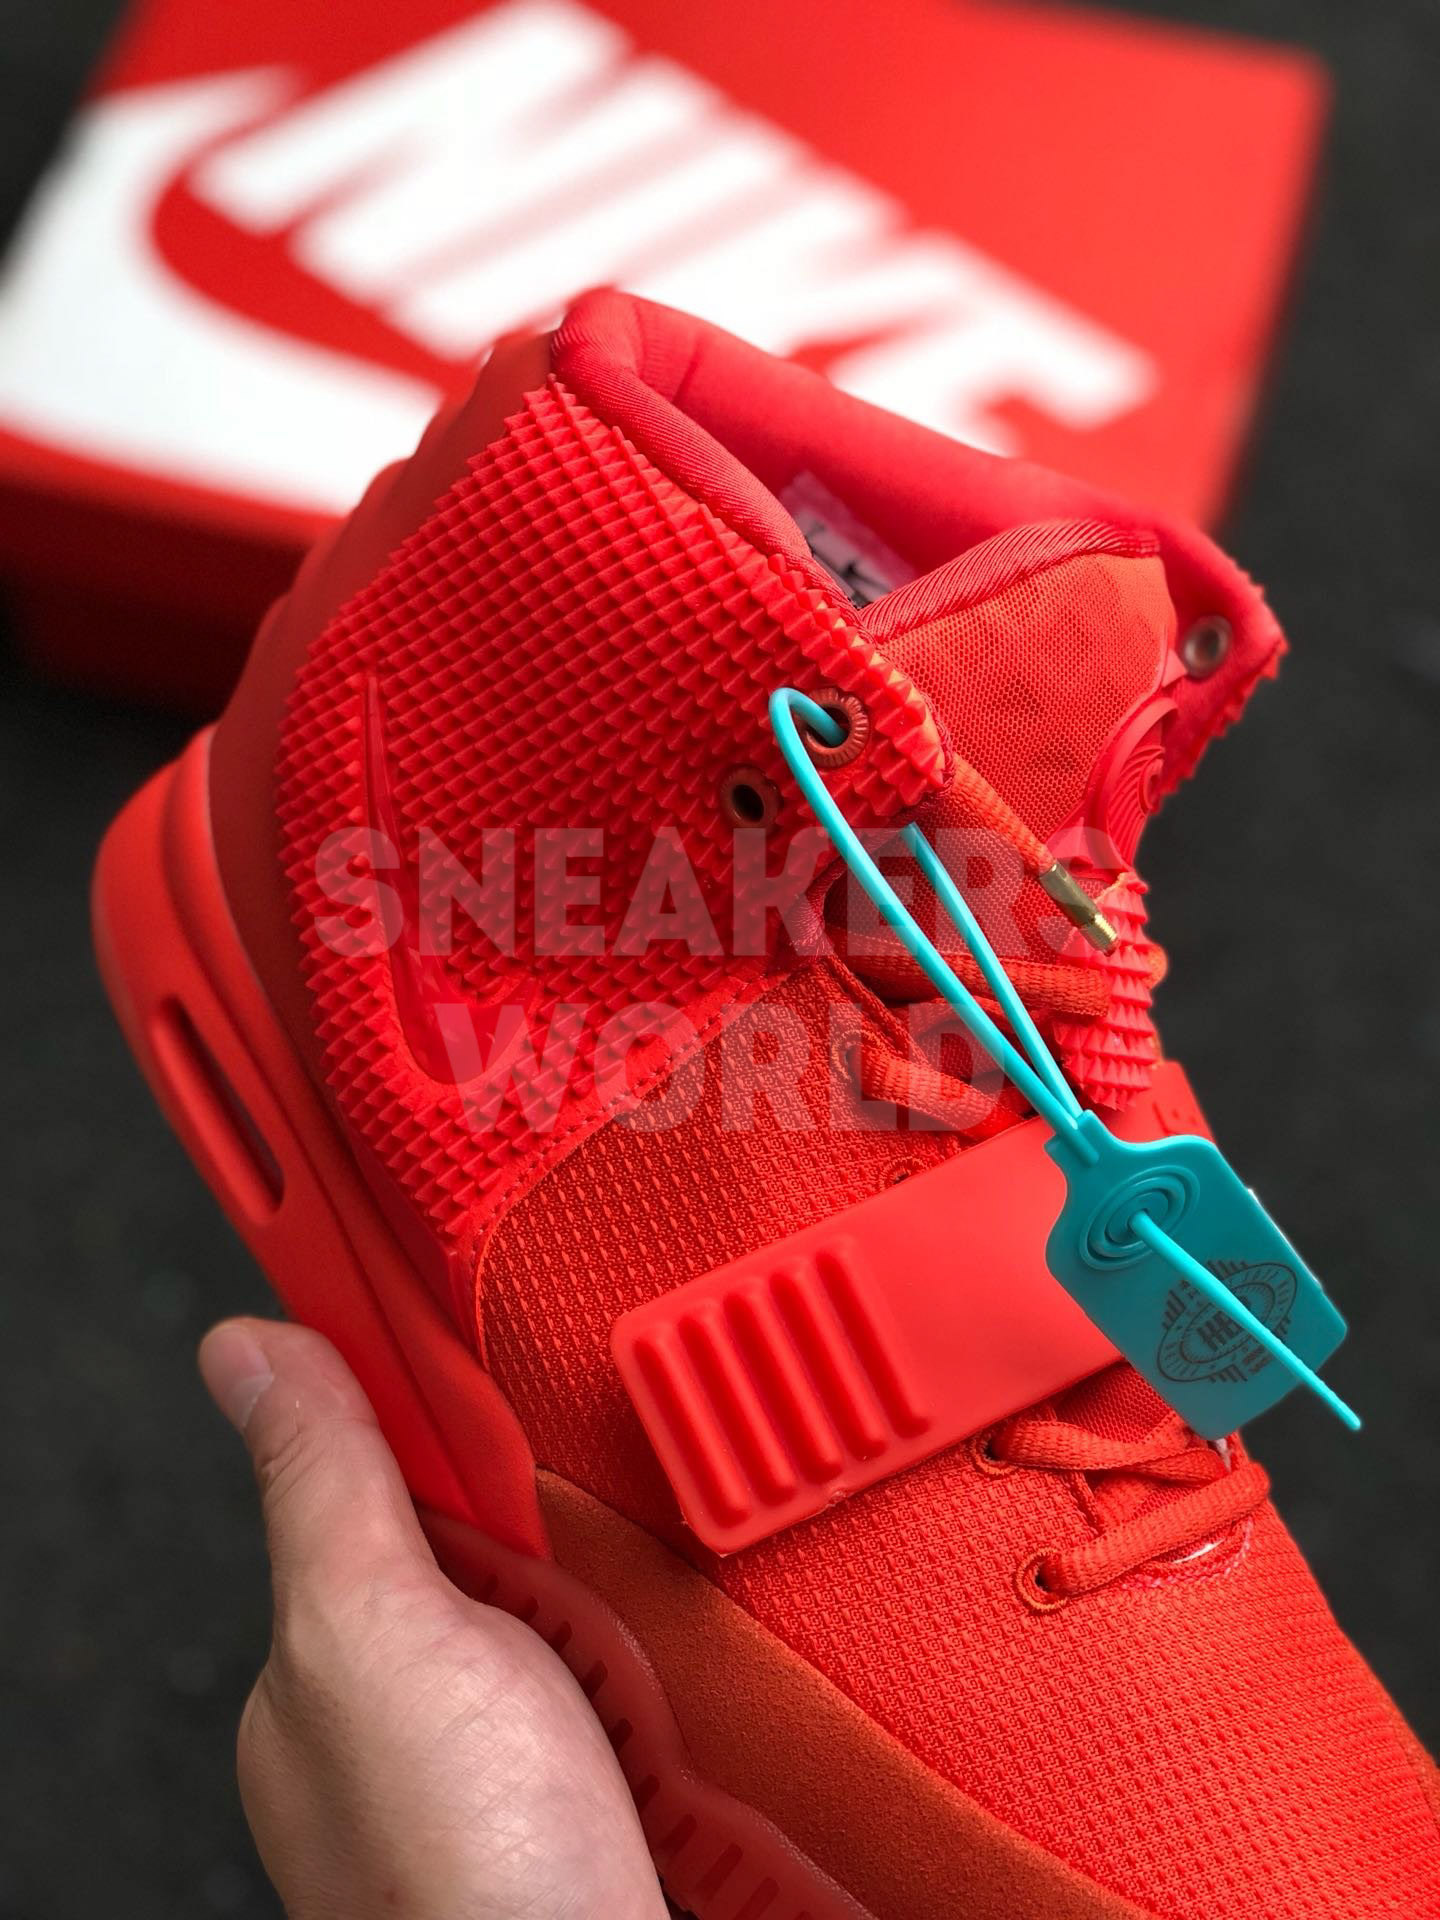 yeezy air 2 red october